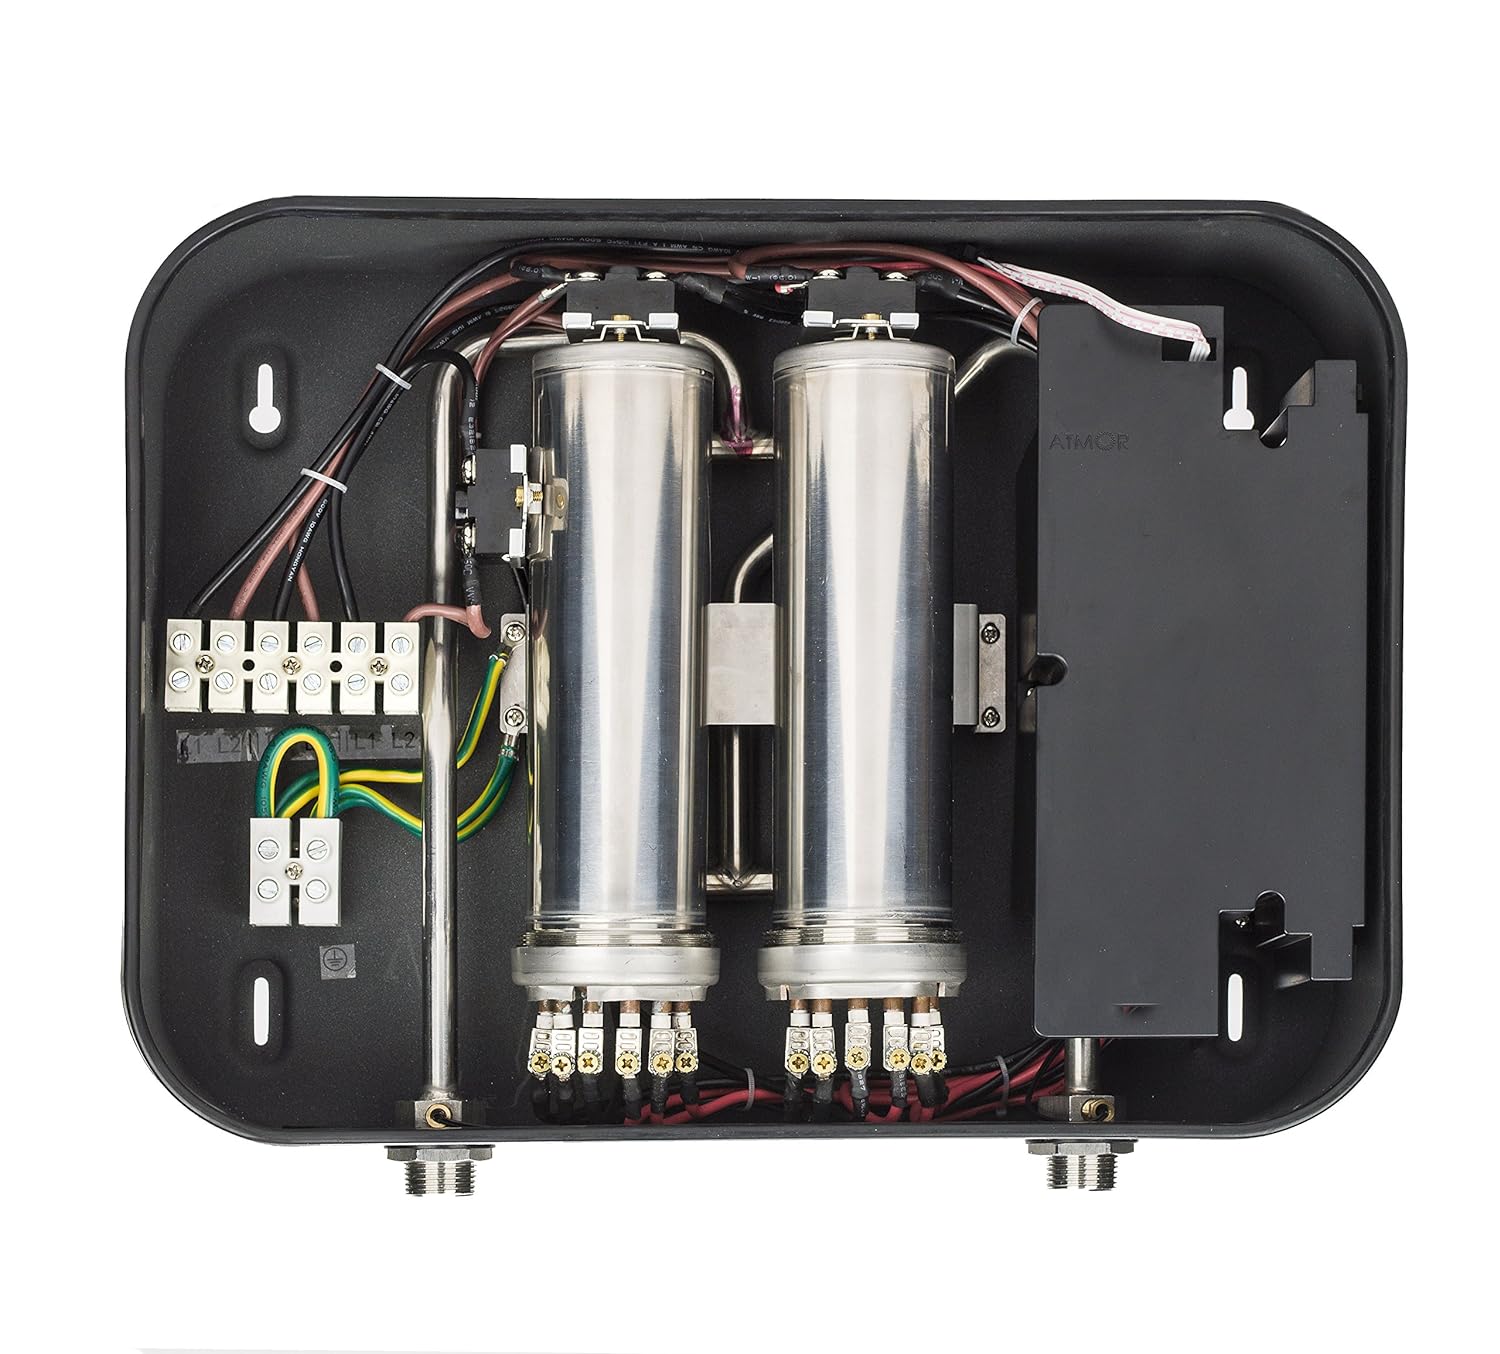 27kW/240V Electric Tankless Water Heater, 5.1GPM 112.3 Amps, ThermoPro Series with Digital Thermostatic Control